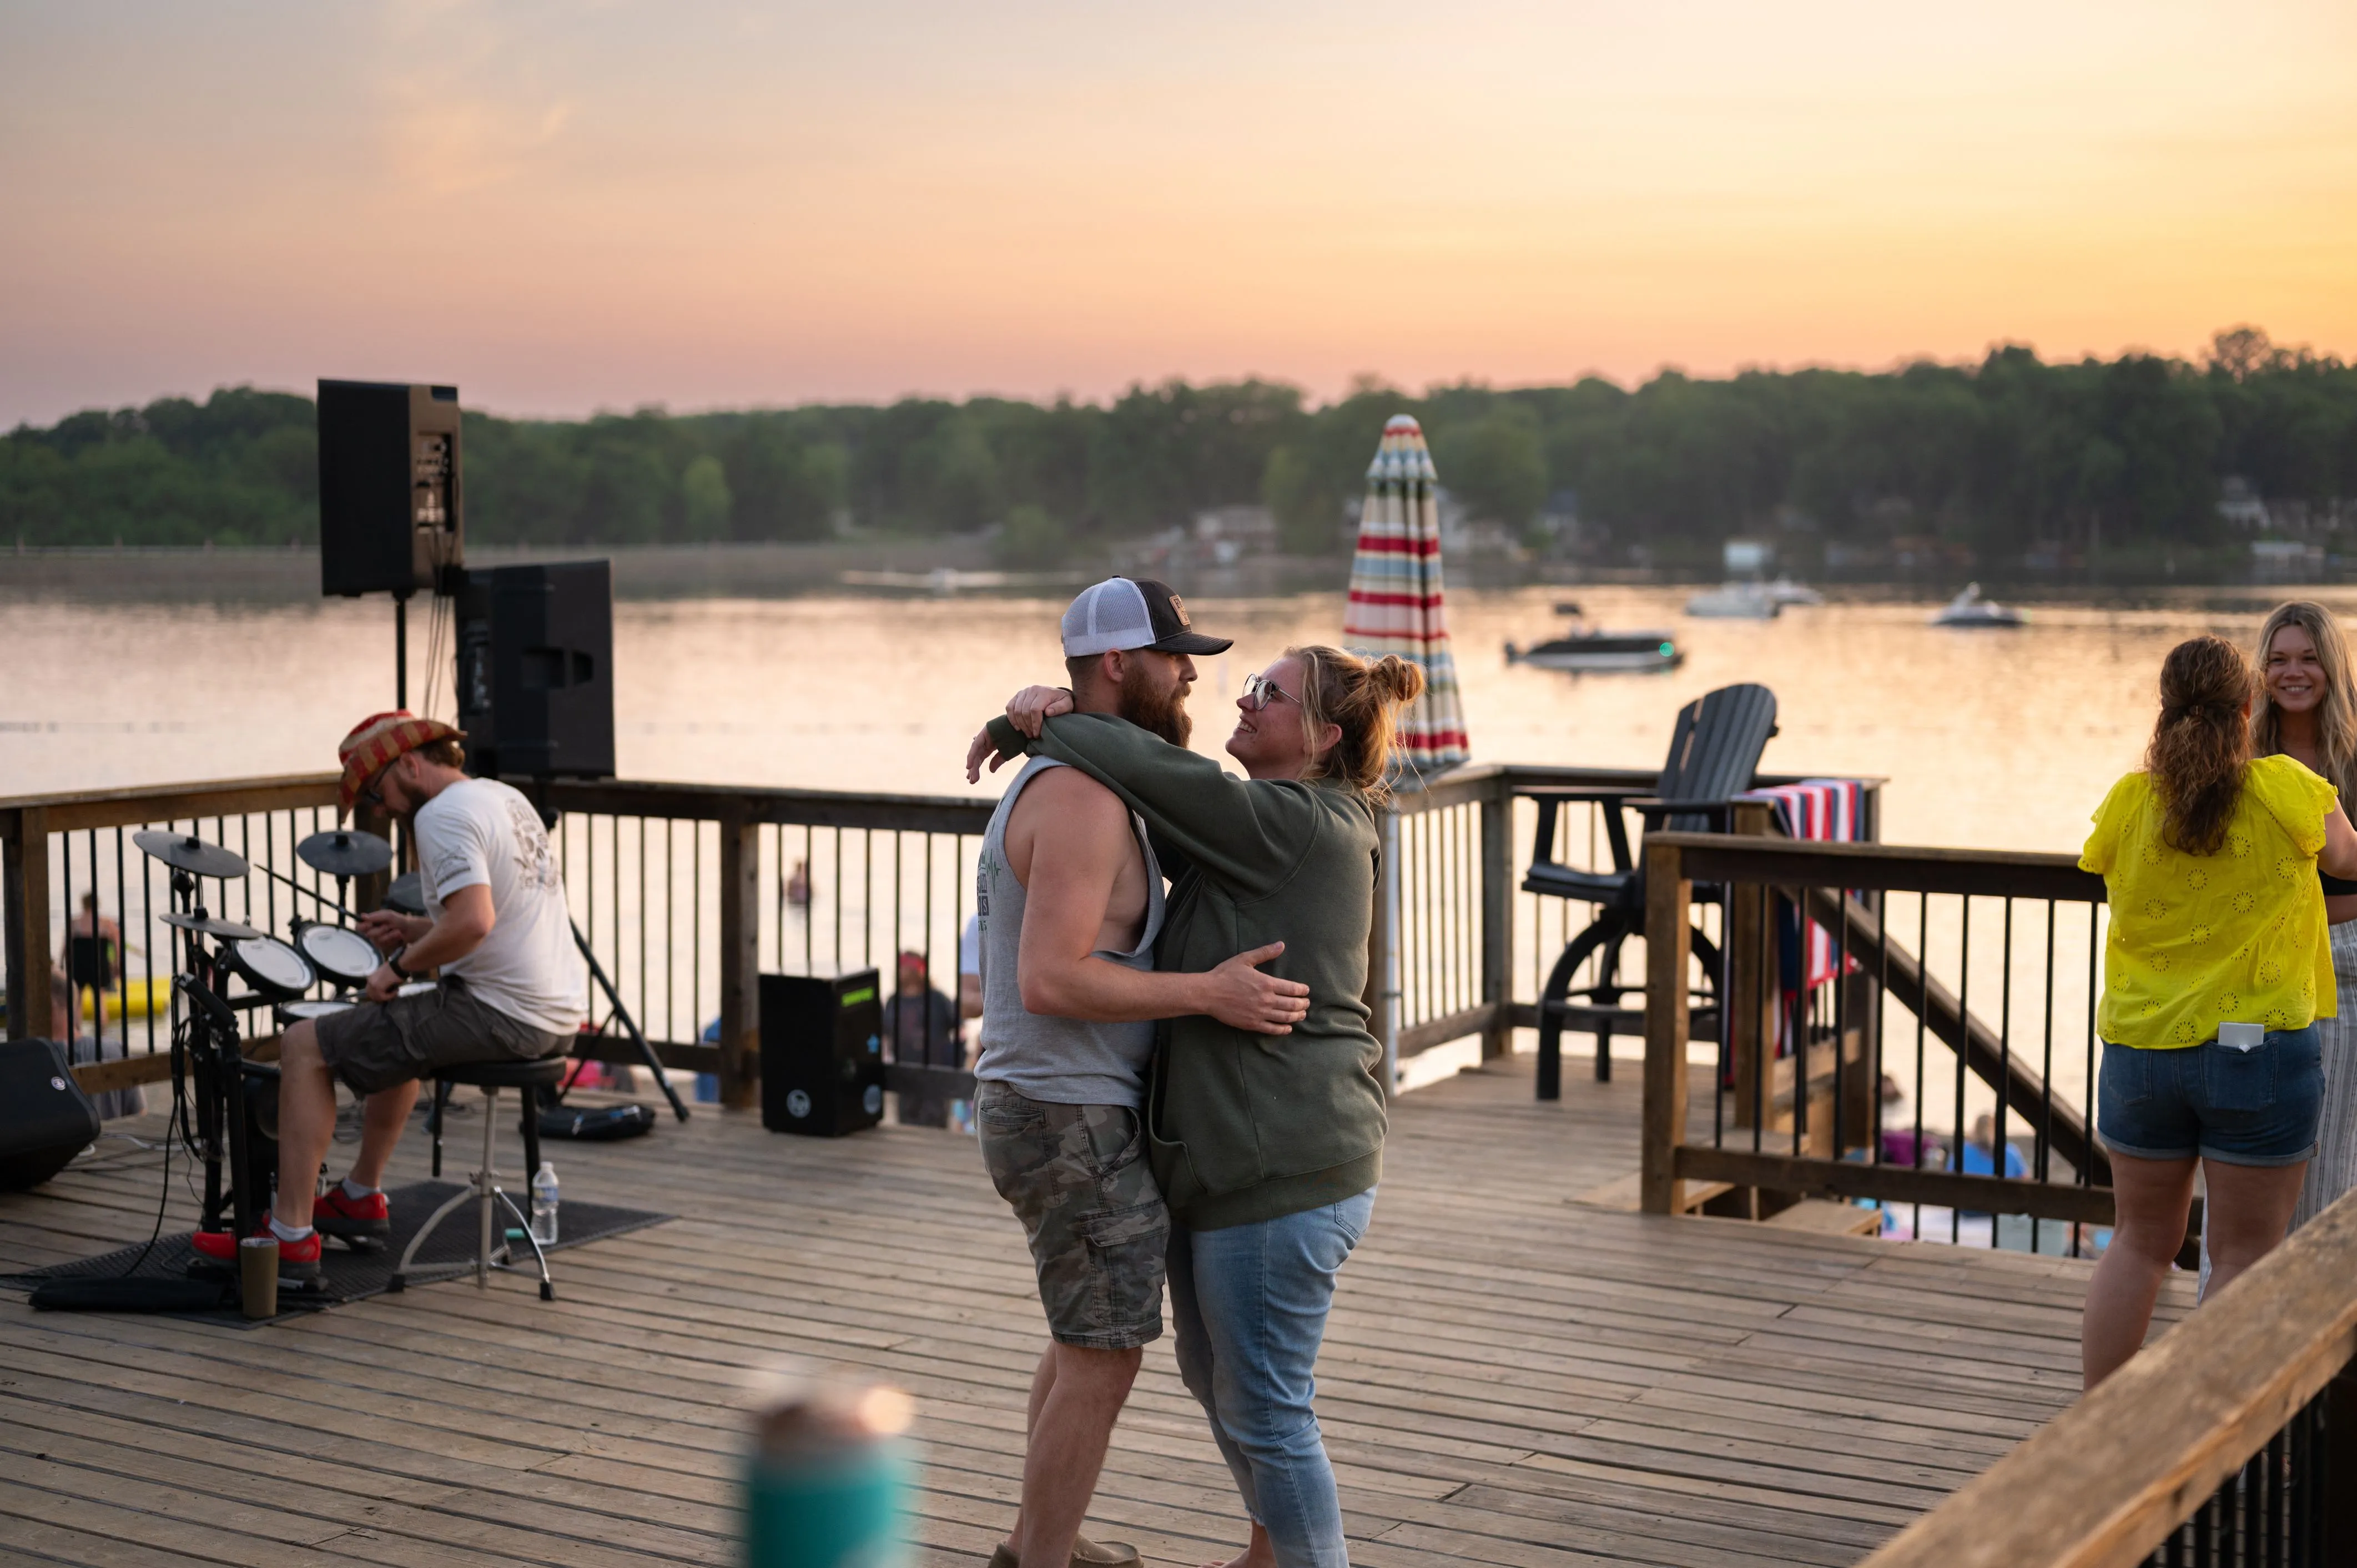 People enjoying a lakeside sunset, with a couple dancing on a deck and others relaxing near a speaker and overlooking the water.